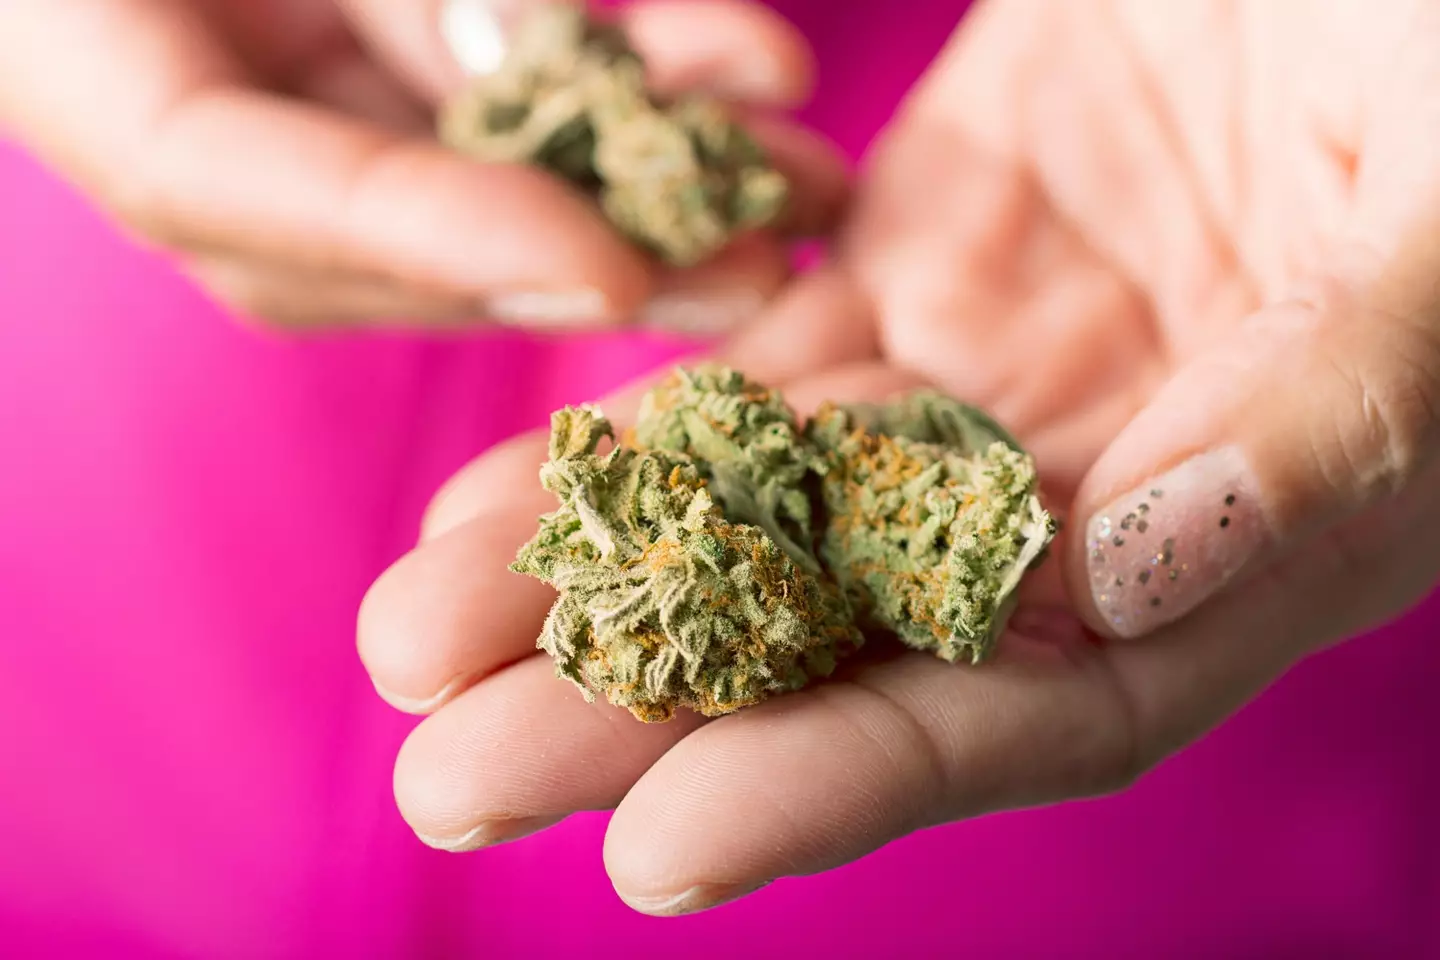 Hands holding cannabis buds.